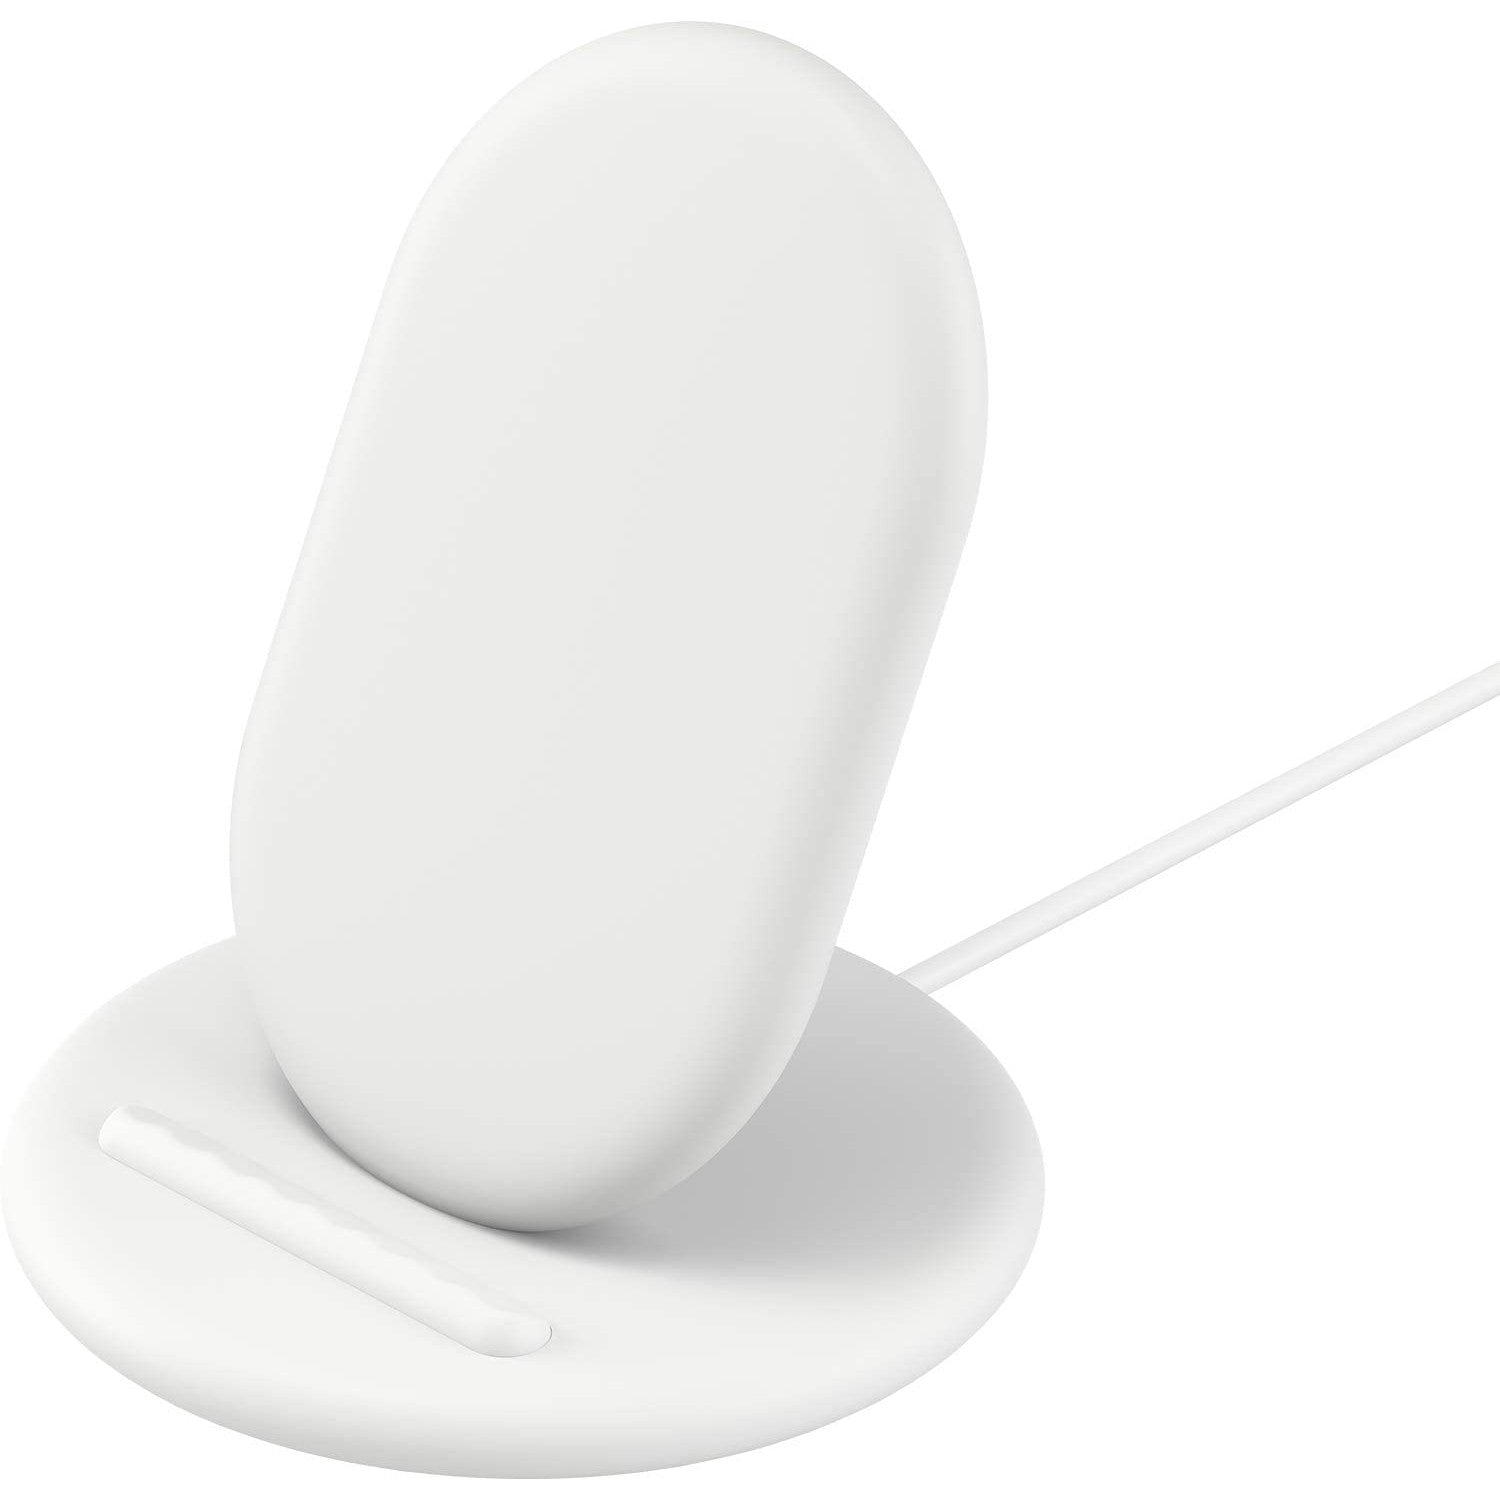 Google Pixel Stand Smart Phone Wireless Charger 